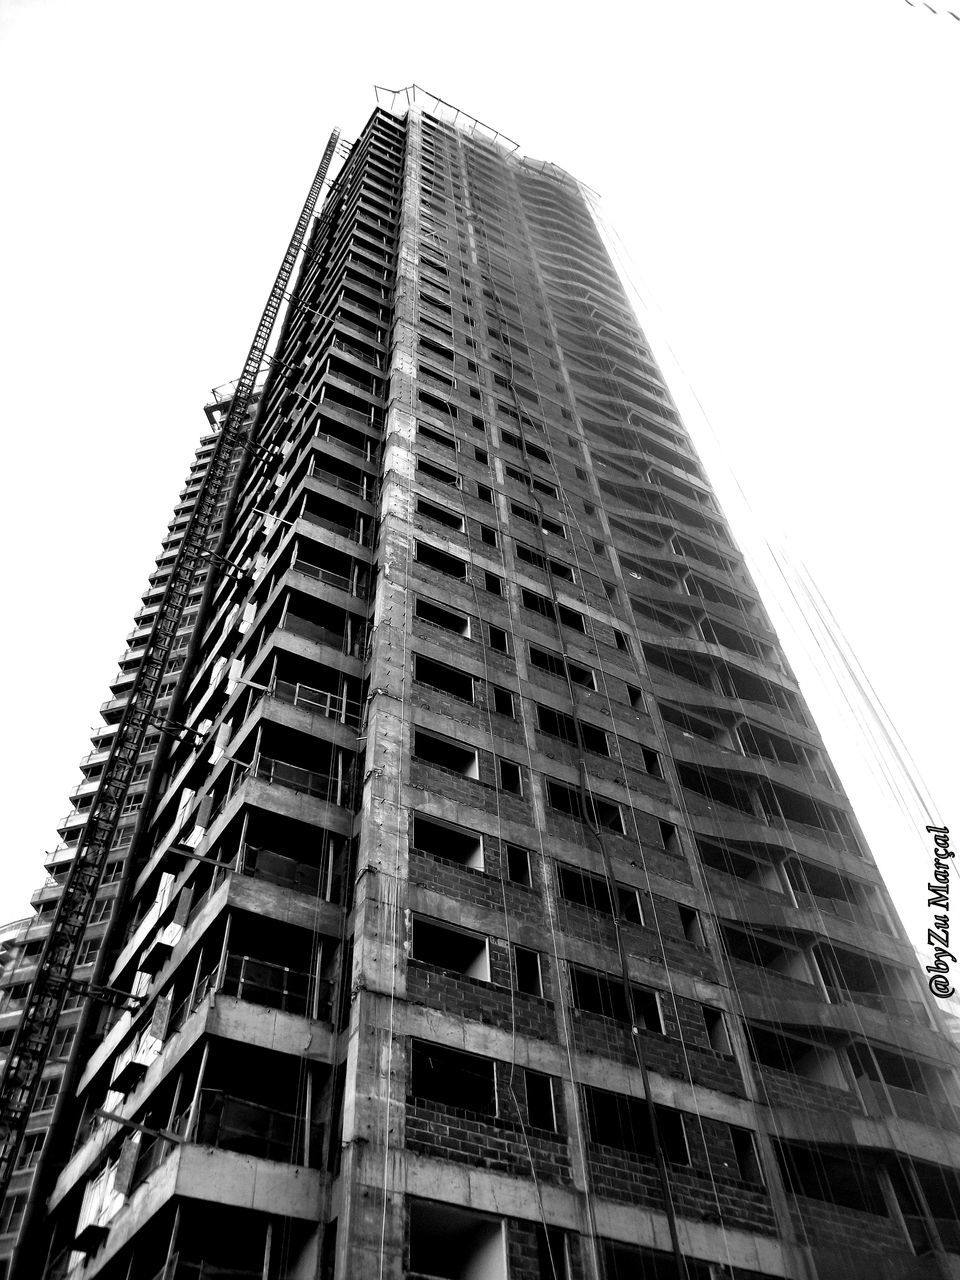 architecture, low angle view, built structure, building exterior, modern, office building, city, skyscraper, clear sky, tall - high, building, tower, sky, glass - material, day, tall, outdoors, no people, city life, development